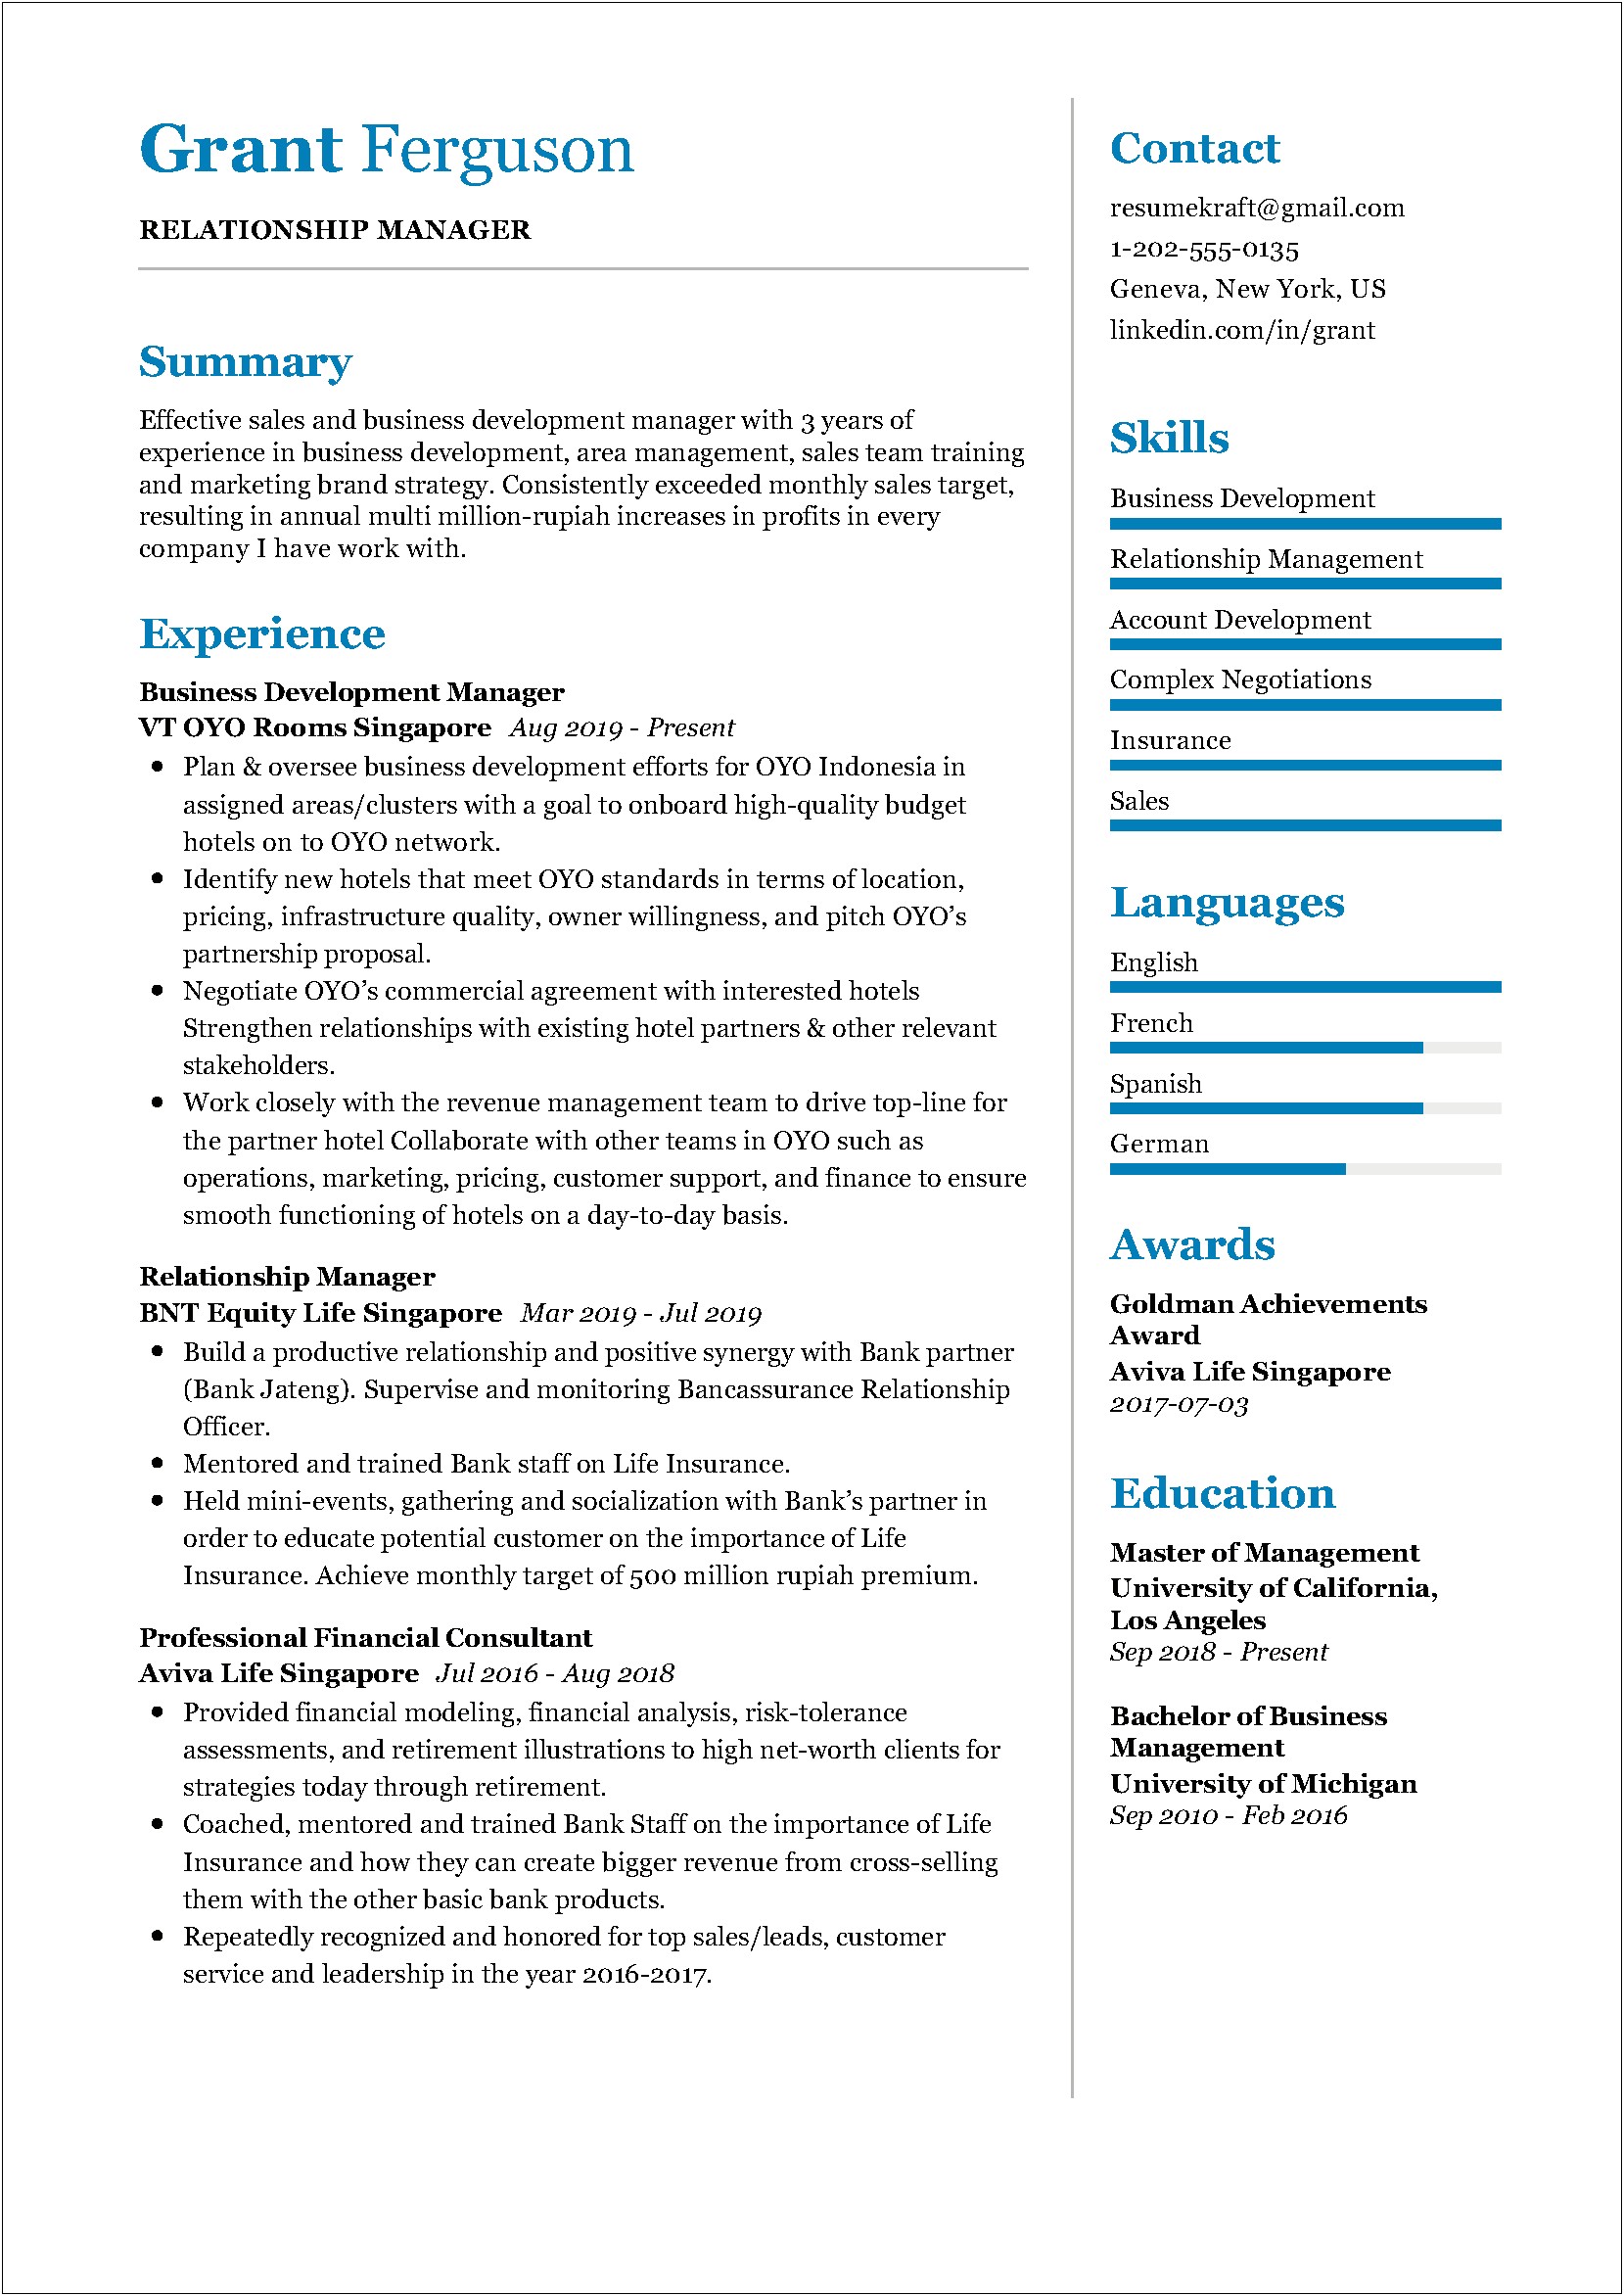 Resume For Relationship Manager In Stock Market